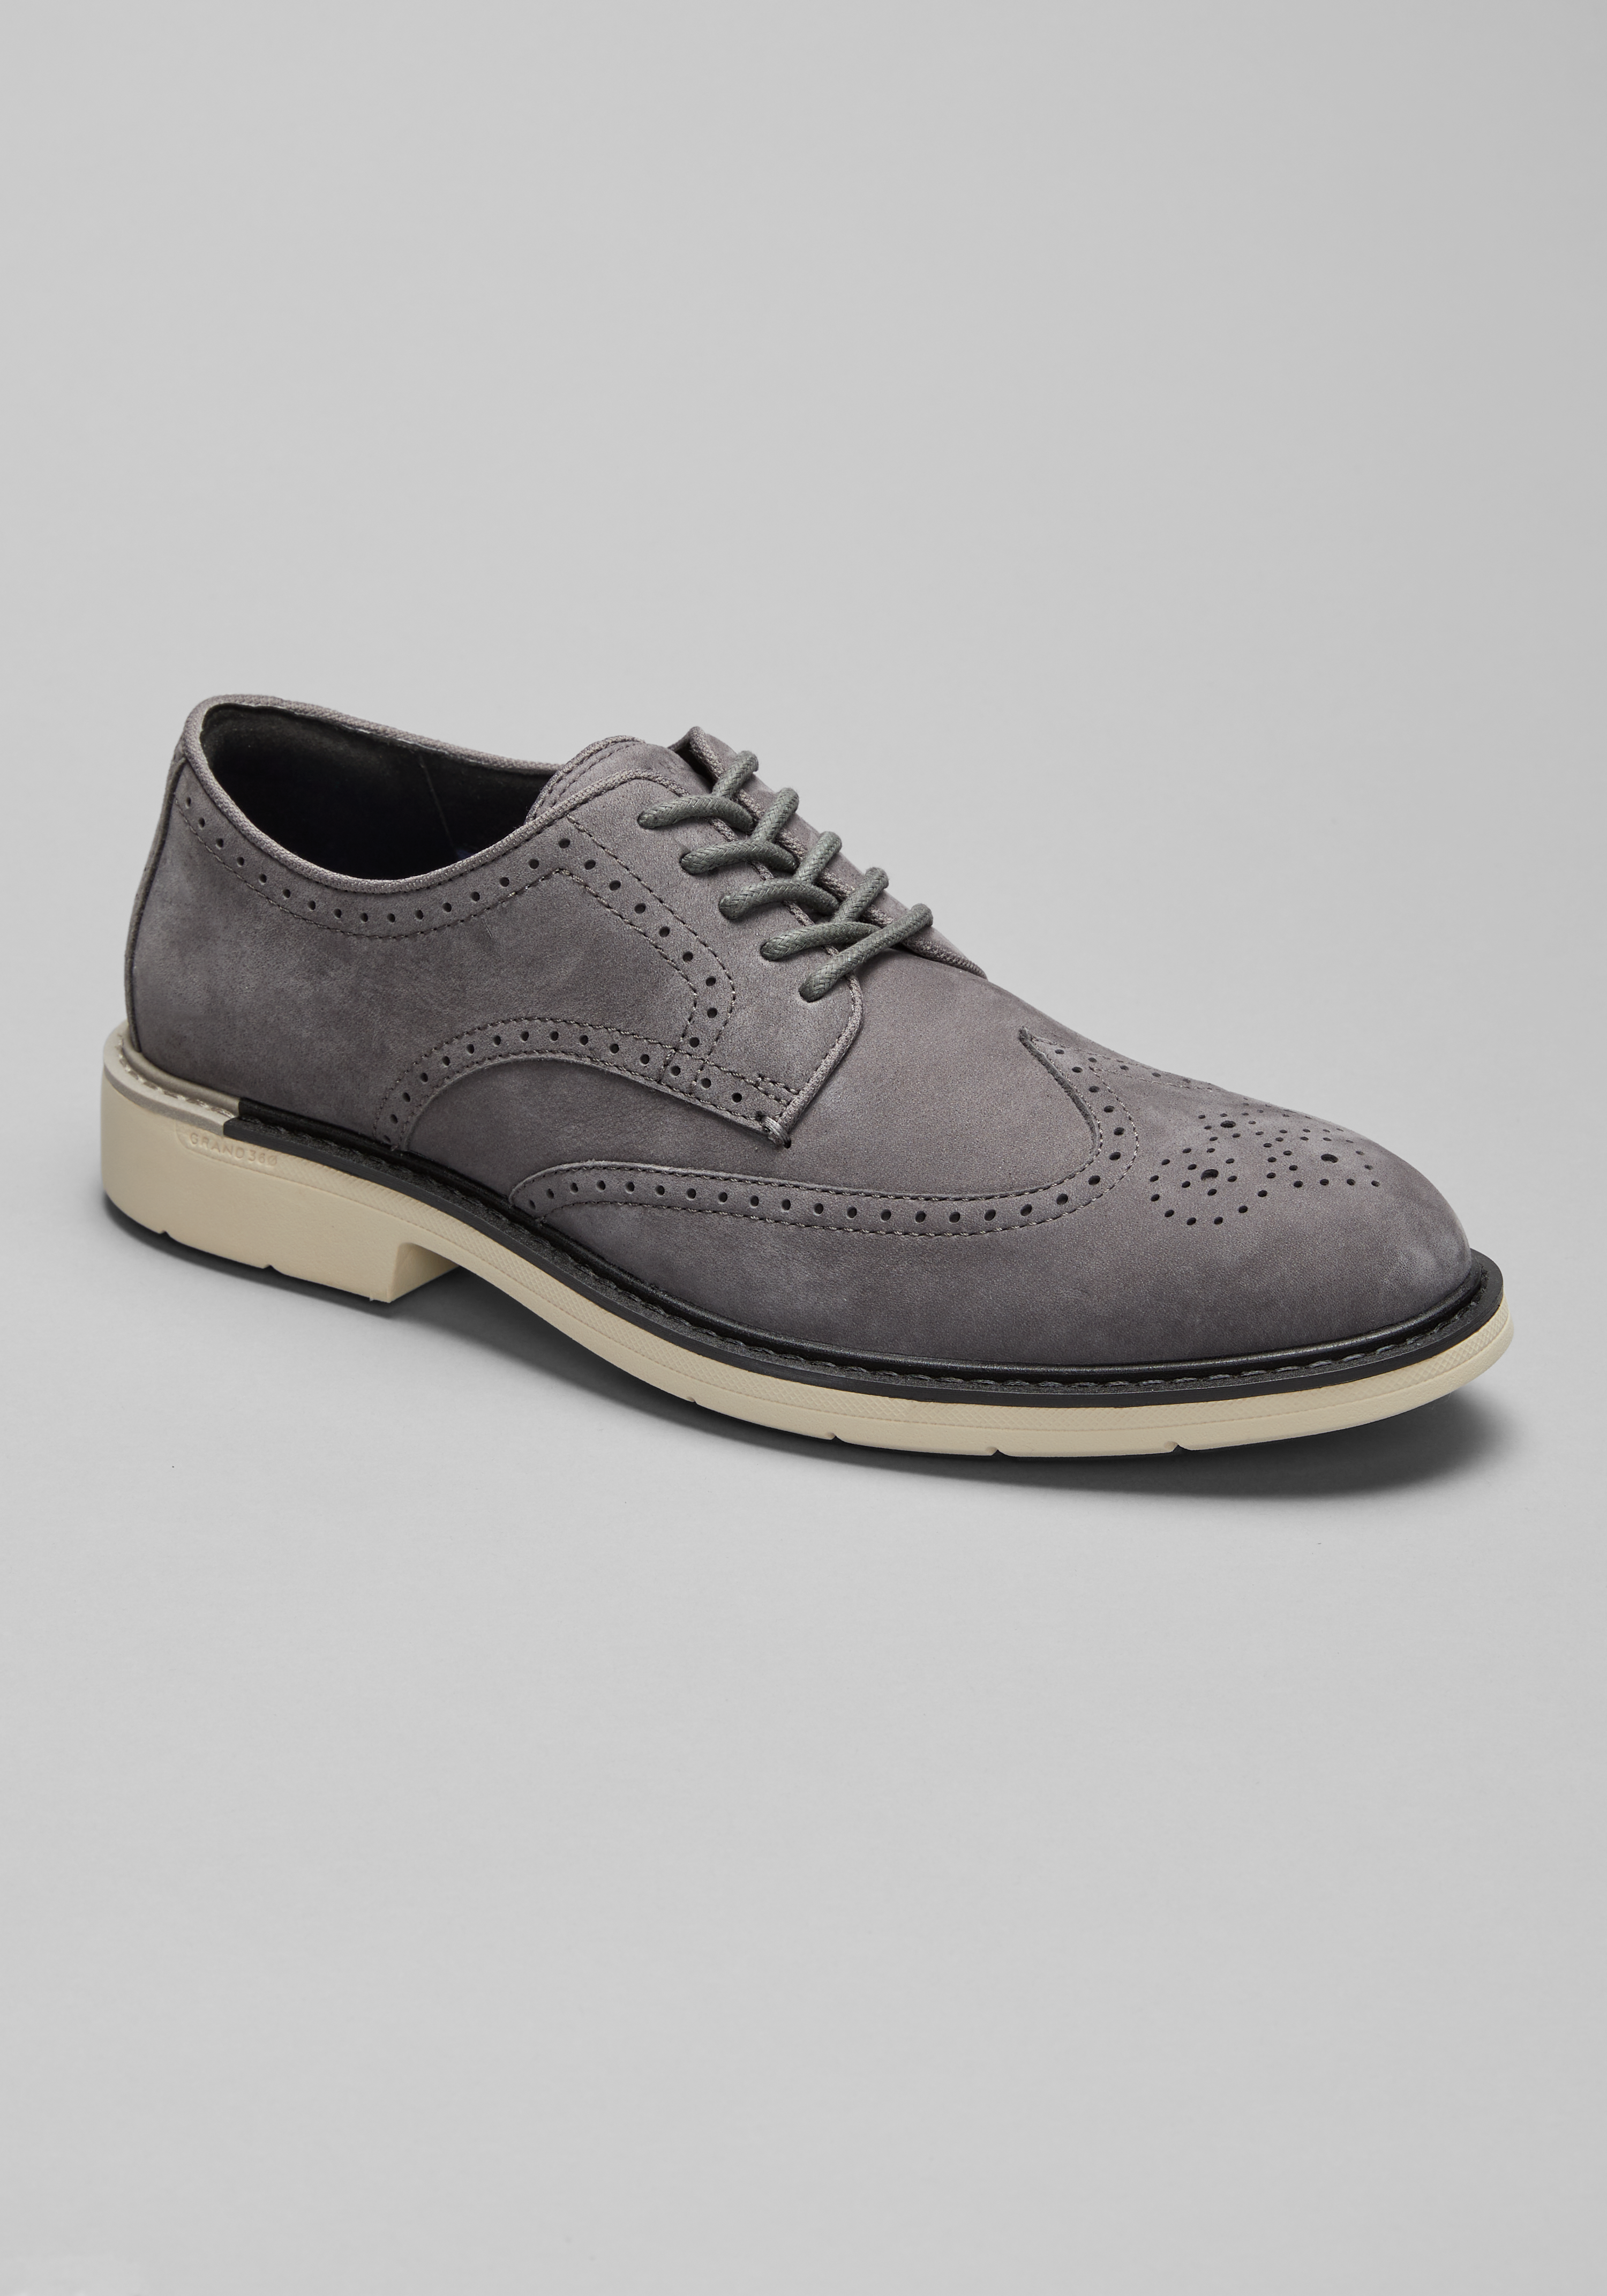 Cole Haan Go-To Wingtip Oxfords CLEARANCE